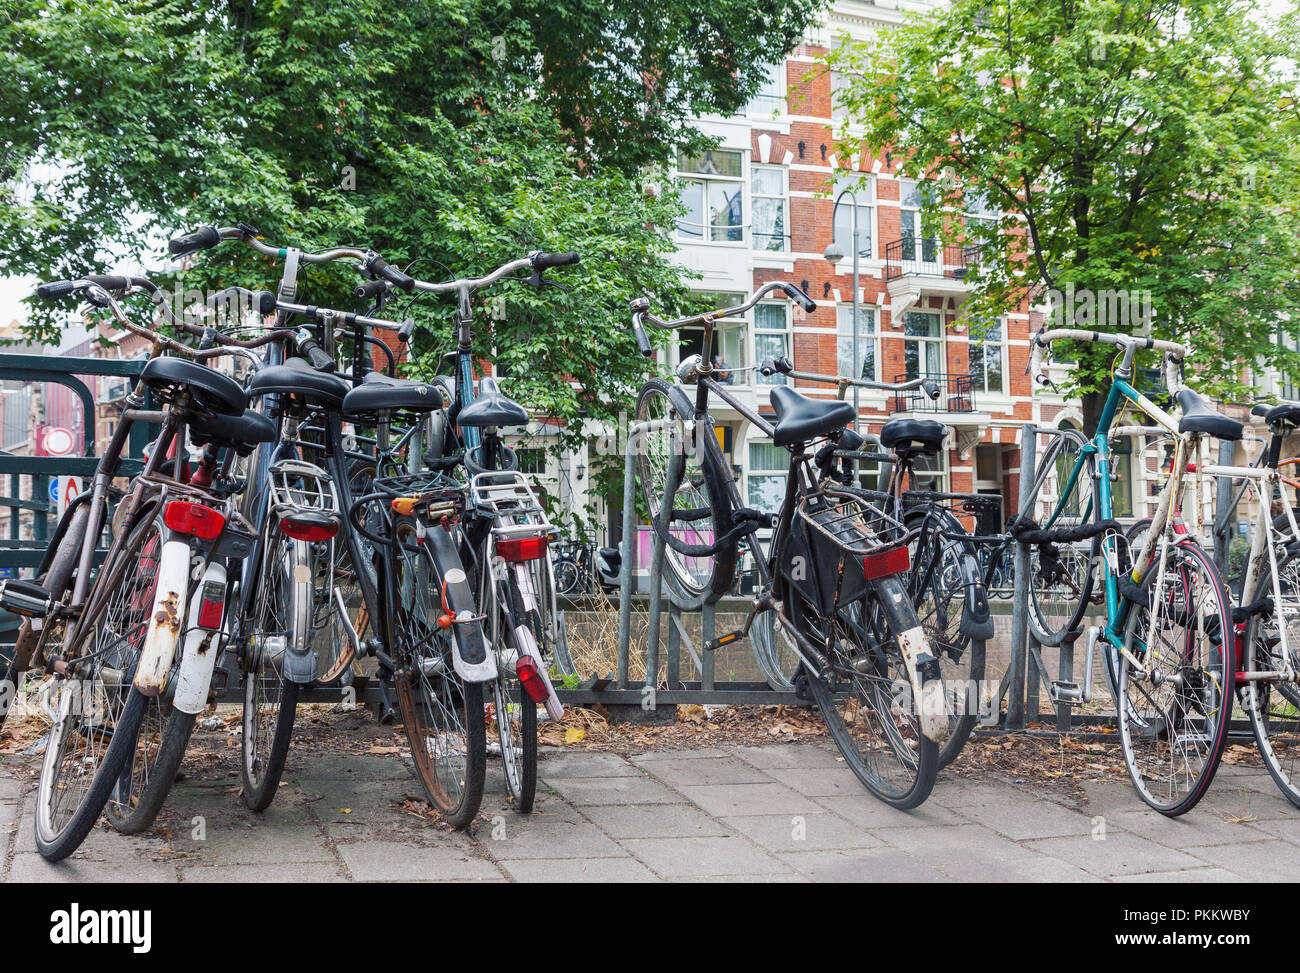 Group of old weathered vintage bicycles parked on the street in Amsterdam, Netherlands Stock Photo